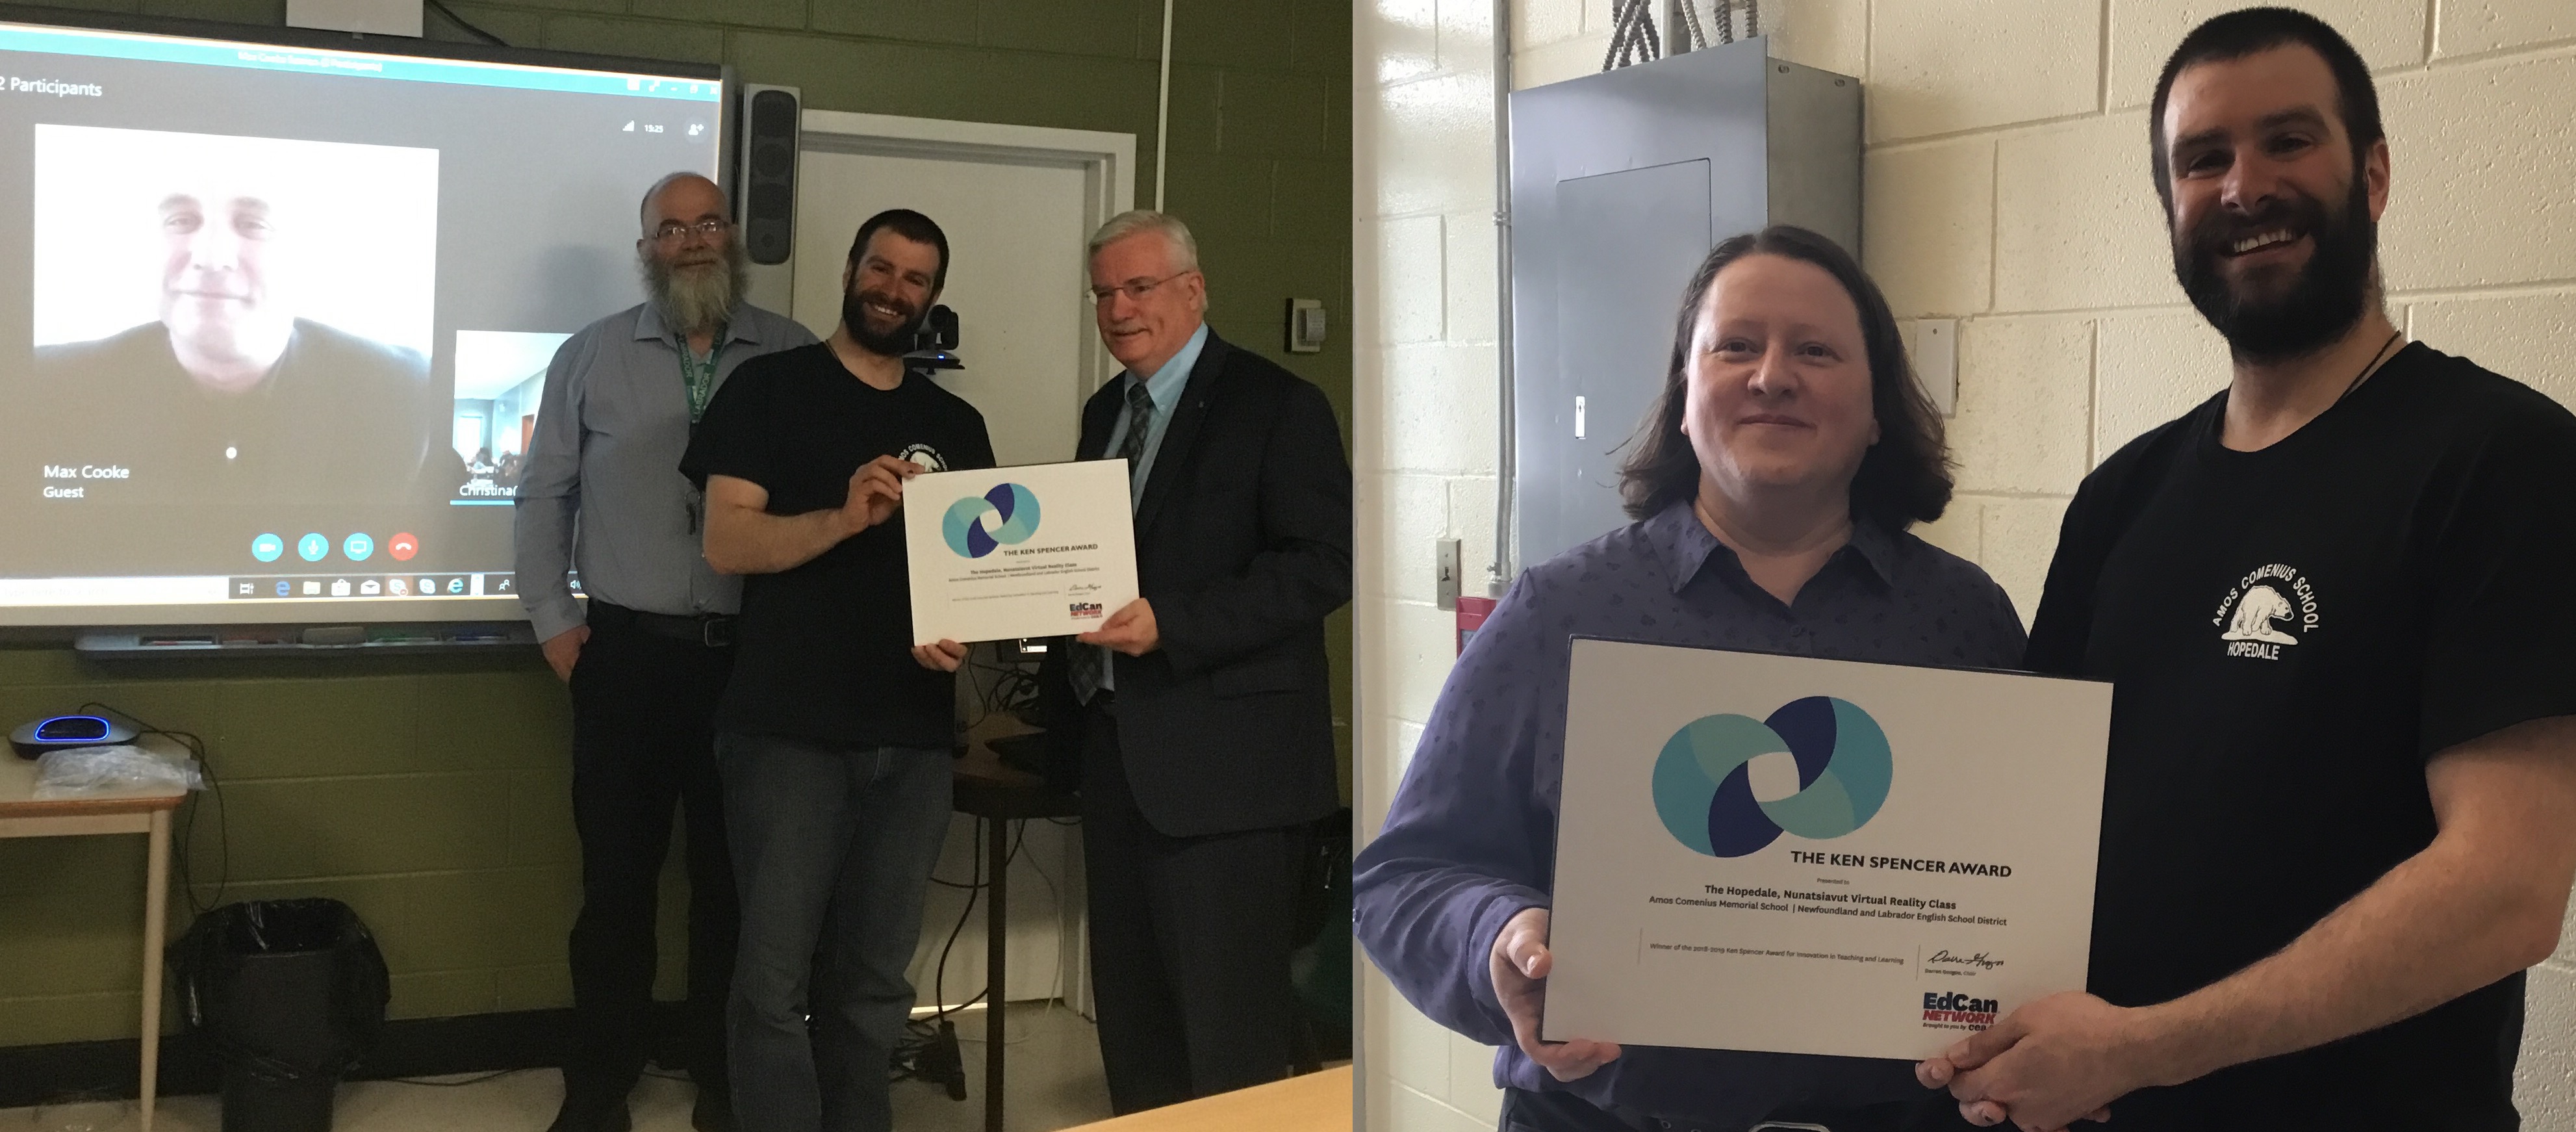 Left Photo: (from l to r) EdCan's Max Cooke (on screen), ACMS Principal Dean Coombs, ACMS teacher Curtis Oliver, District Director of Education Tony Stack. Right photo: District E-Learning Facilitator Andrea Neville with Mr. Oliver 